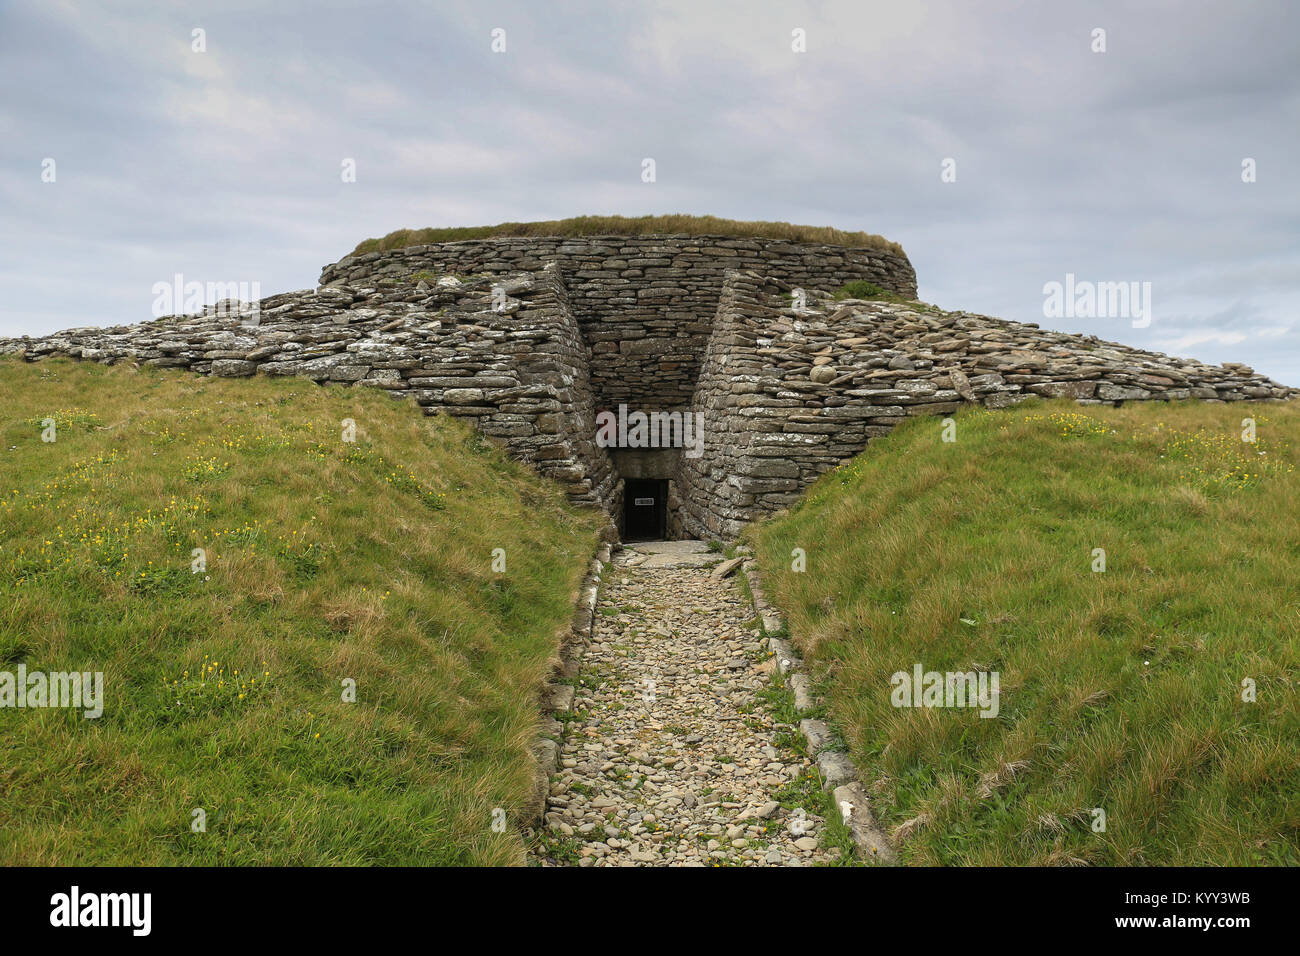 The huge chambered Quoyness cairn on Sanday, Orkney is 5000 years old, built of drystone construction,has a central chamber with six cells off of it. Stock Photo